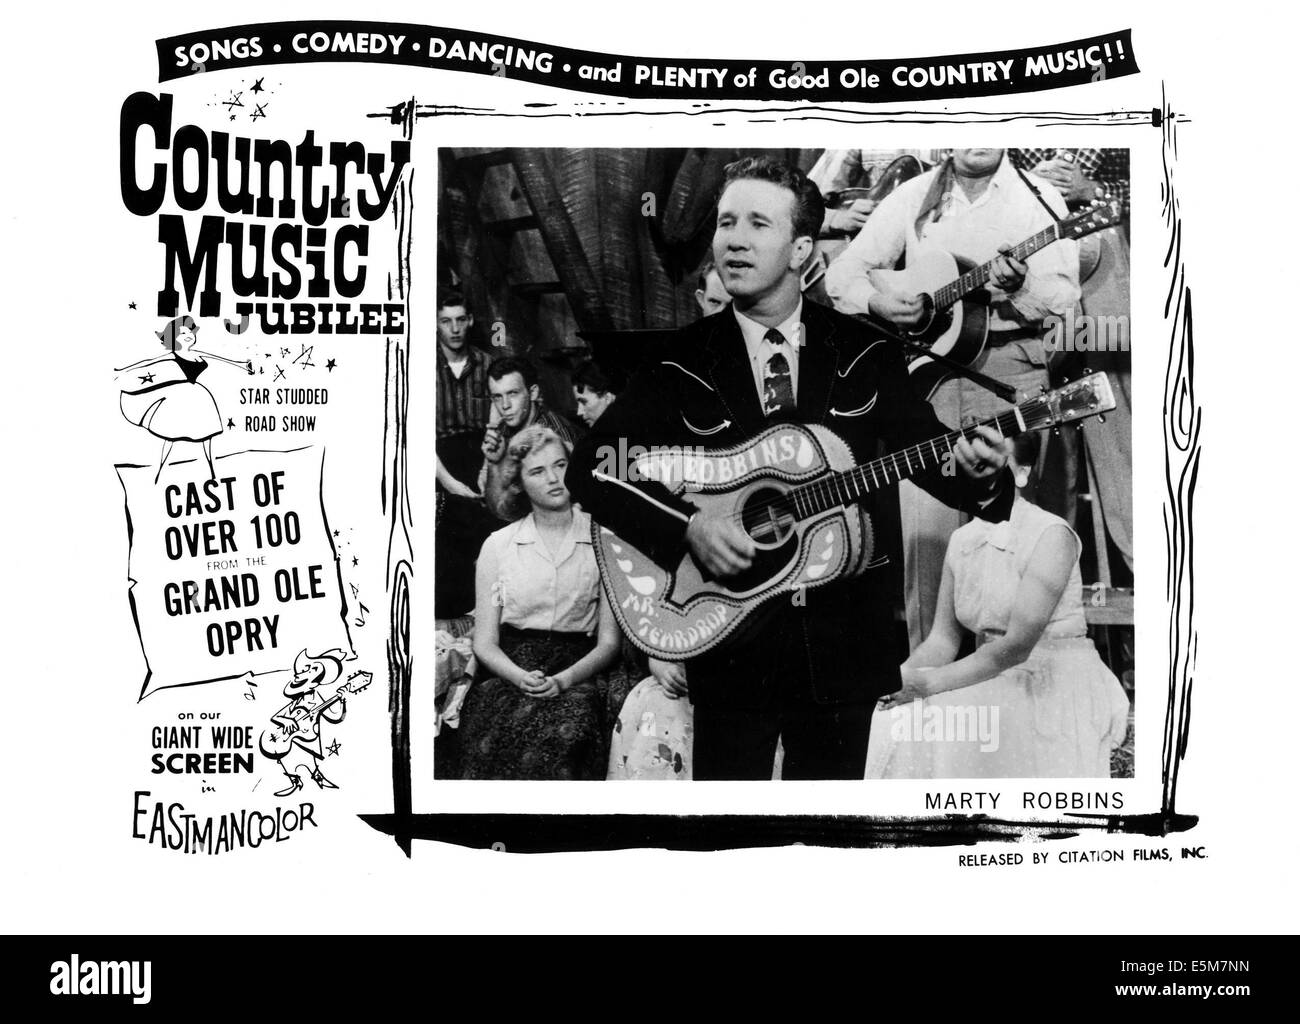 COUNTRY MUSIC JUBILEE, Marty Robbins, 1960 Stock Photo